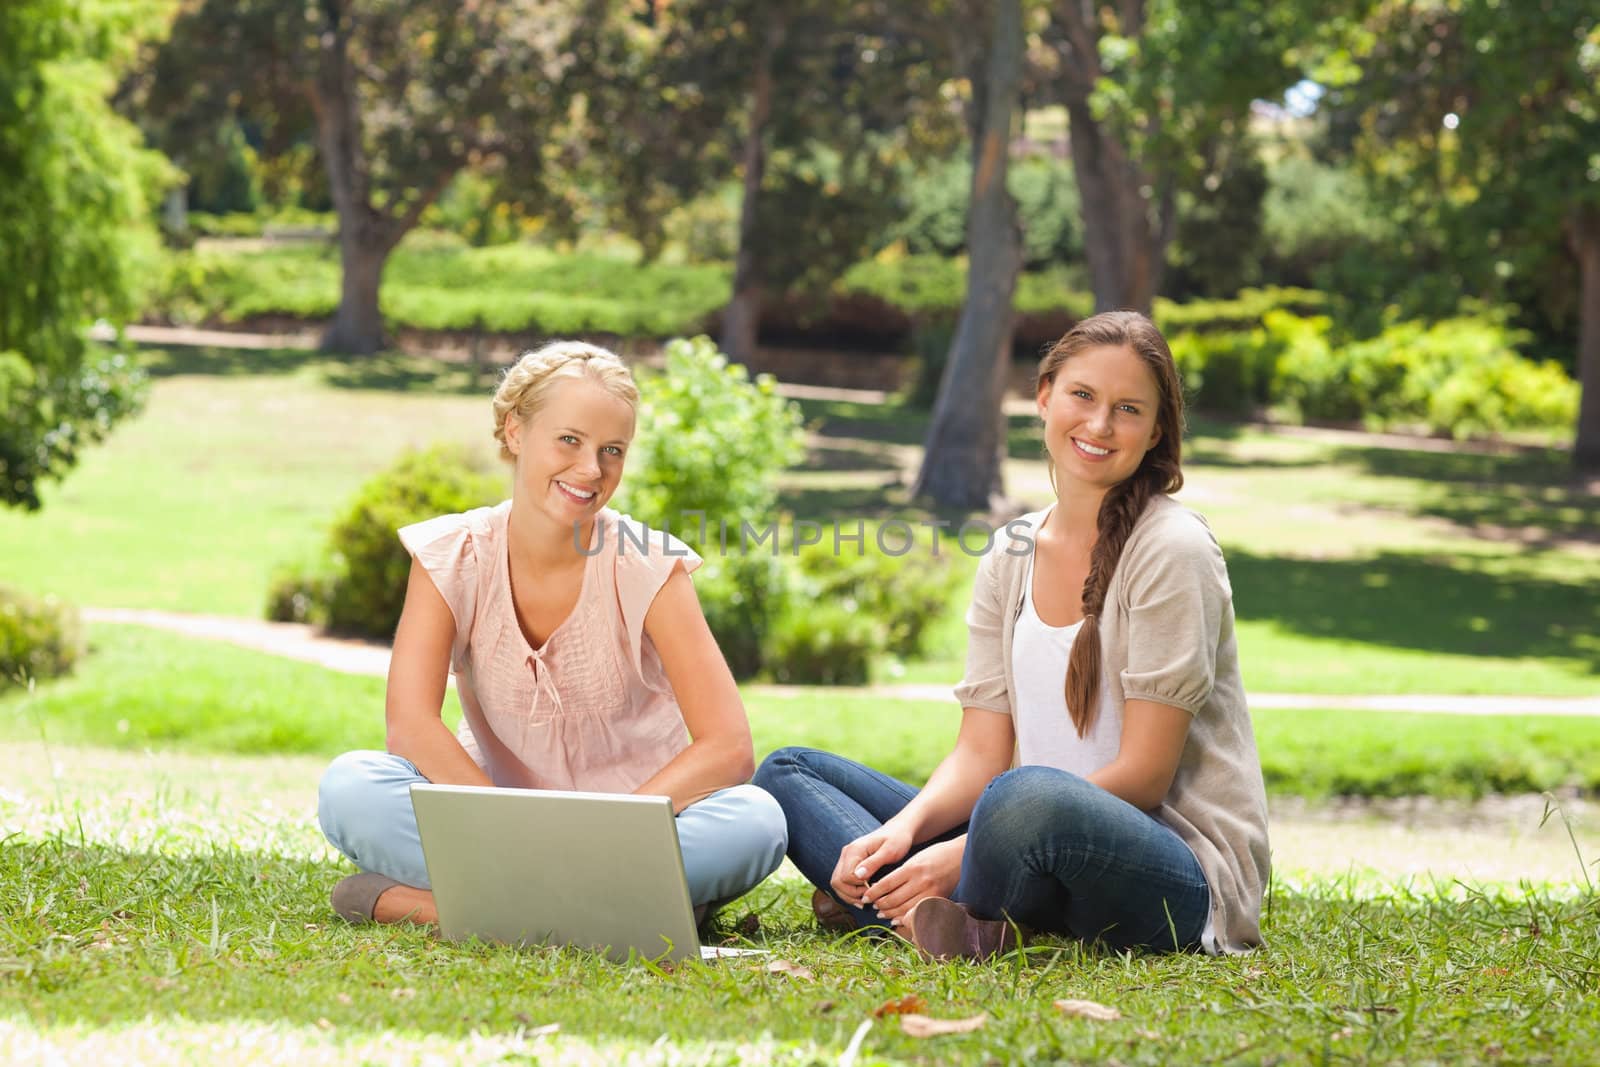 Smiling young women sitting in the park with a laptop